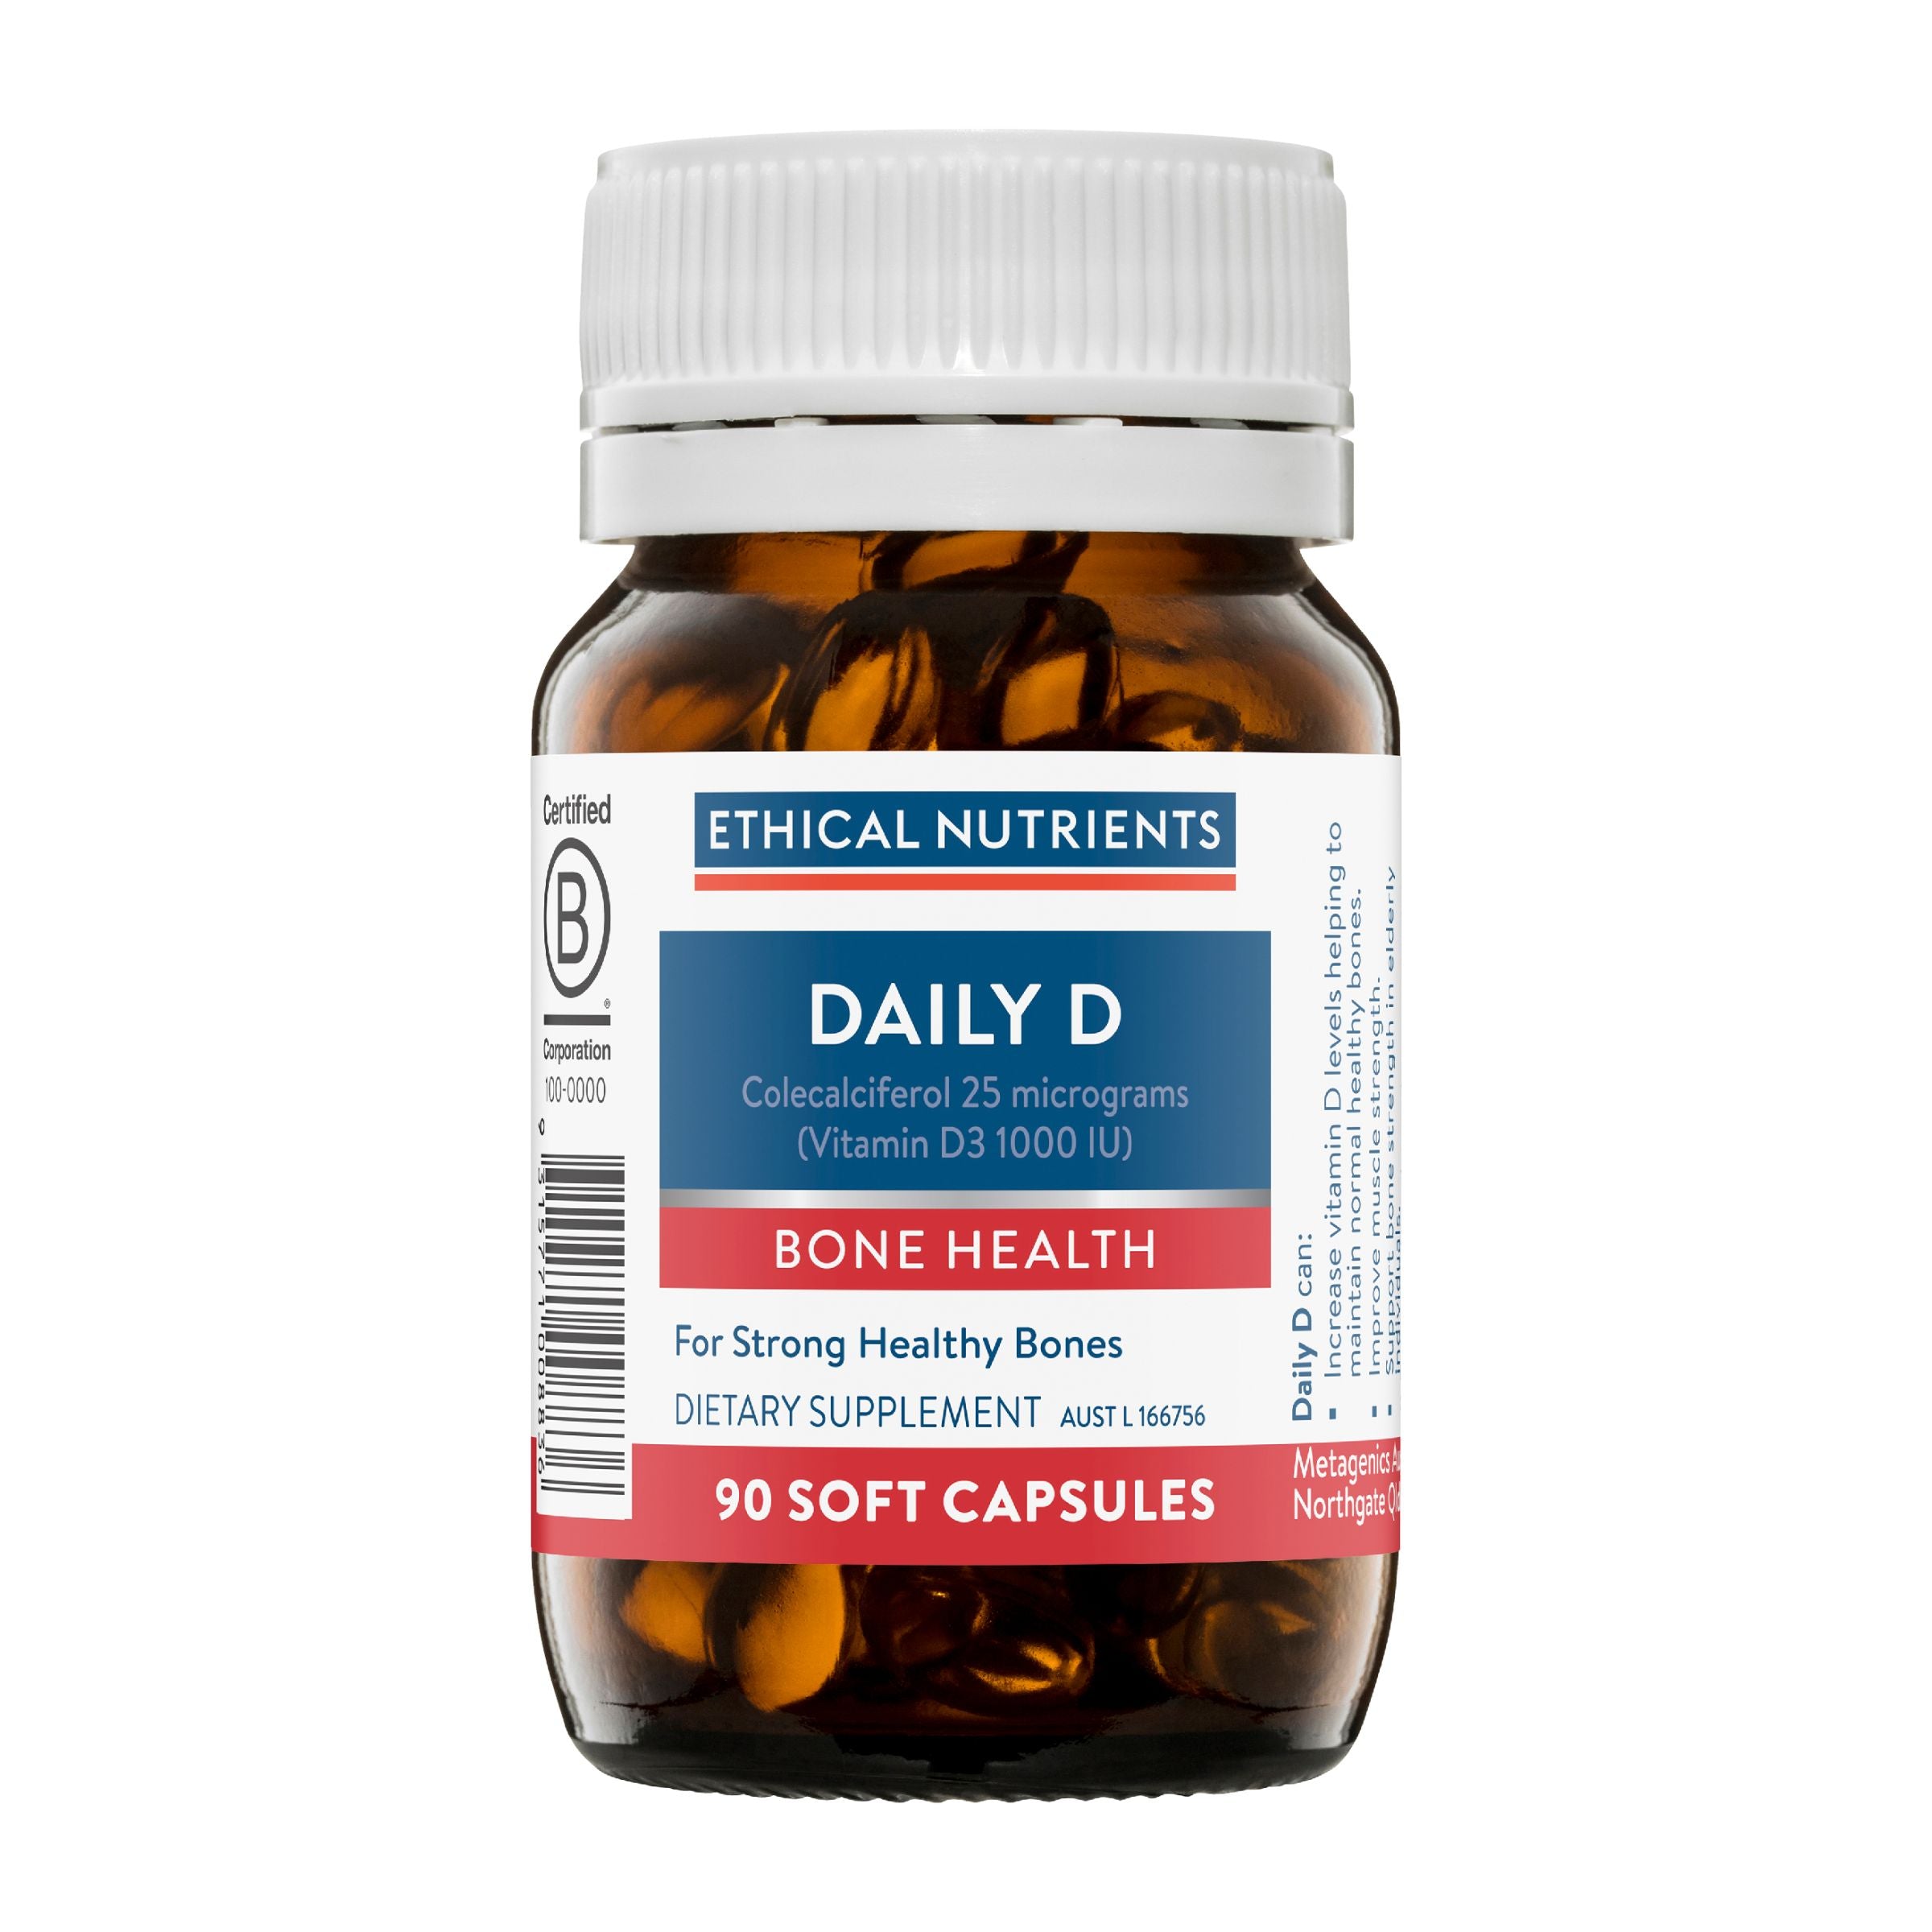 Ethical Nutrients Daily D 90 Soft Capsules #size_90 soft capsules